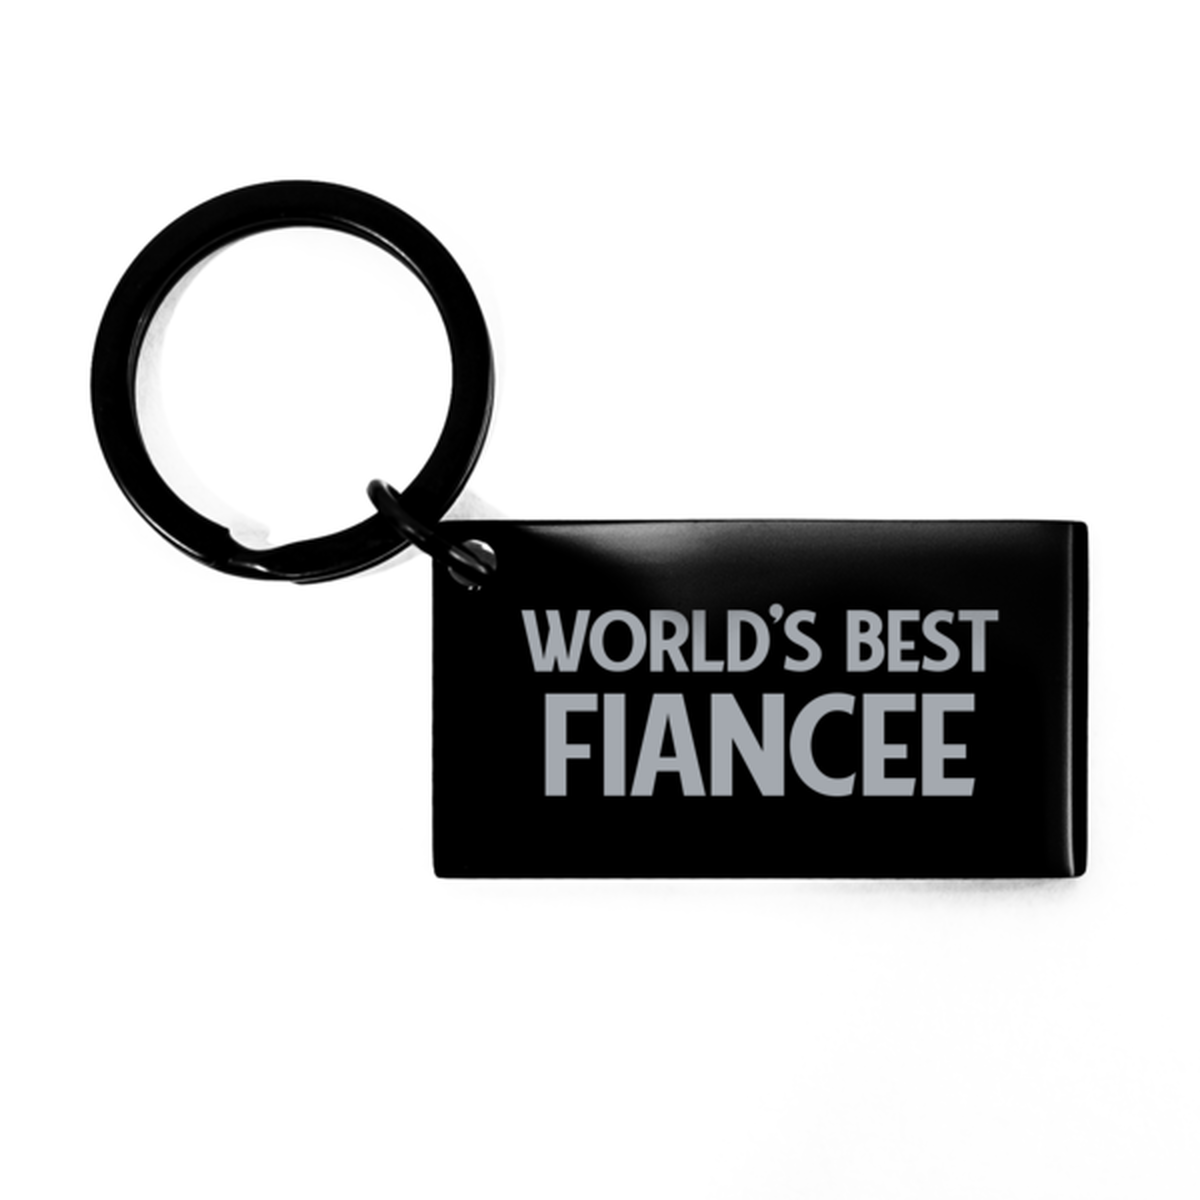 Worlds Best Fiancee Gifts, Funny Black Engraved Keychain For Fiancee, Birthday Presents For Women